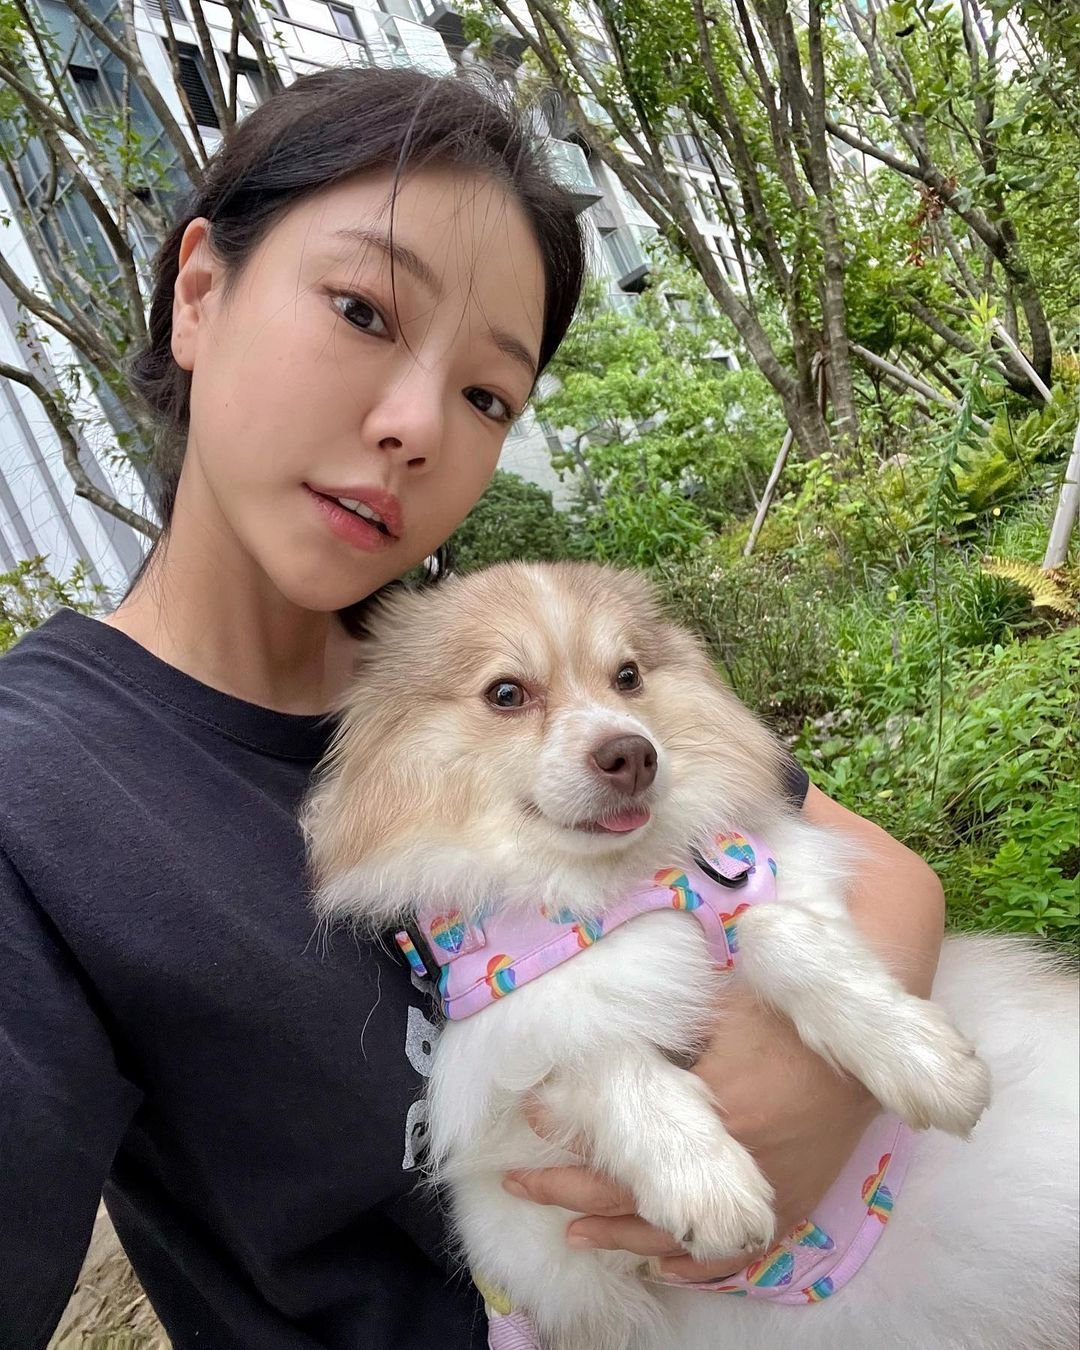 My name is Belle. I am 32 years old. Nice to meet you. I am from Taiwan and now I am in Seoul.    https://t.co/j2BYCsXHYB